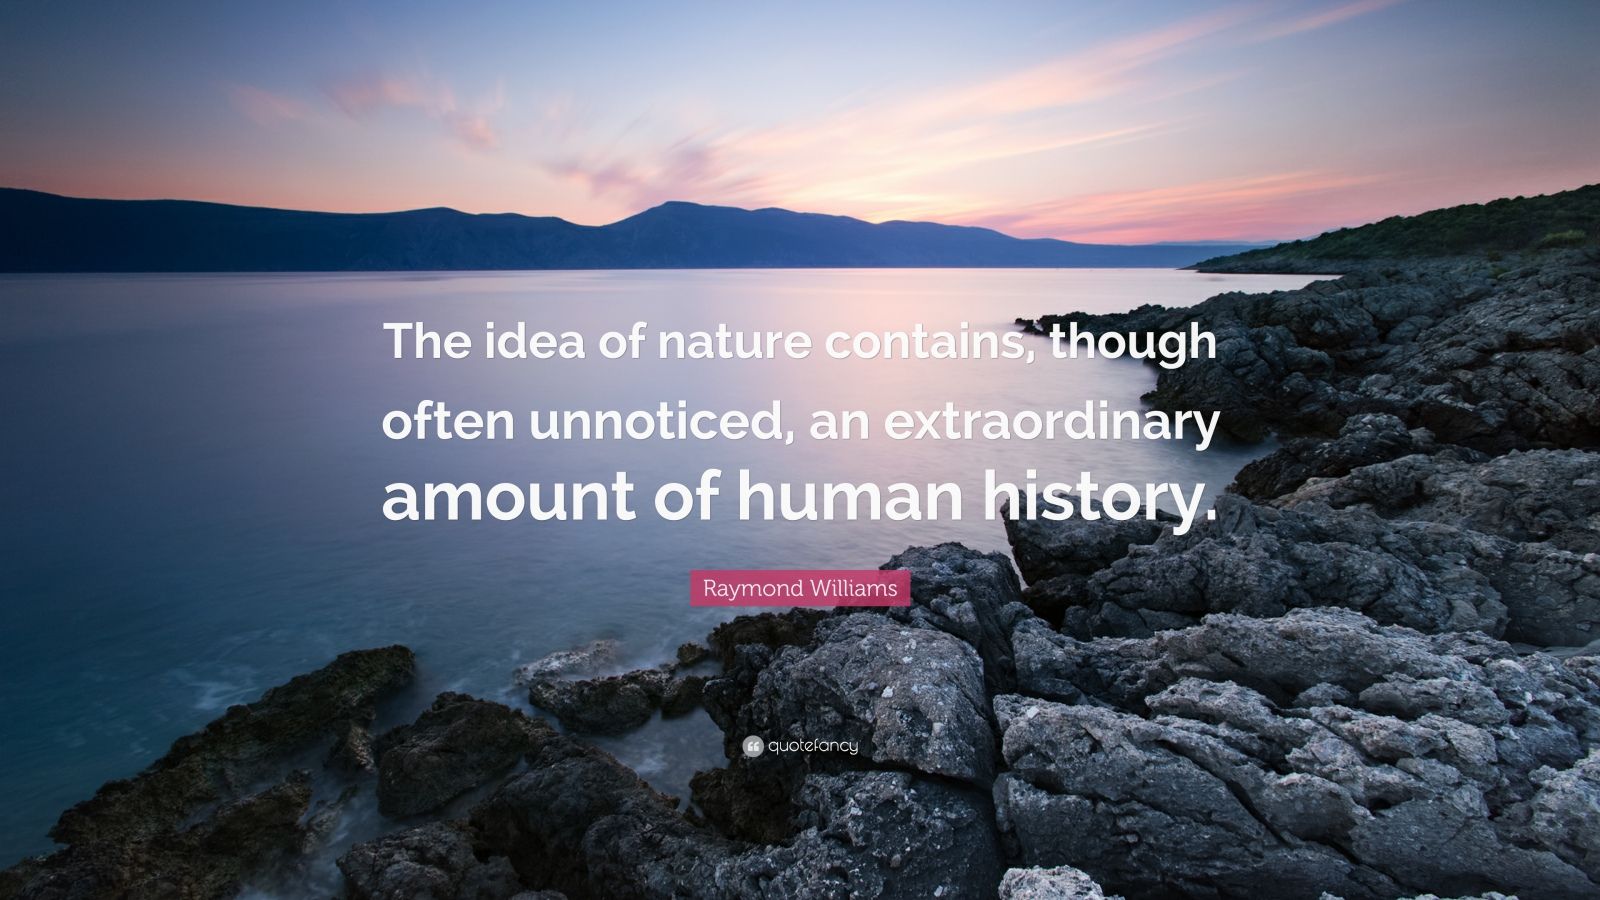 Raymond Williams Quote: “The idea of nature contains, though often unnoticed, an extraordinary human history.”